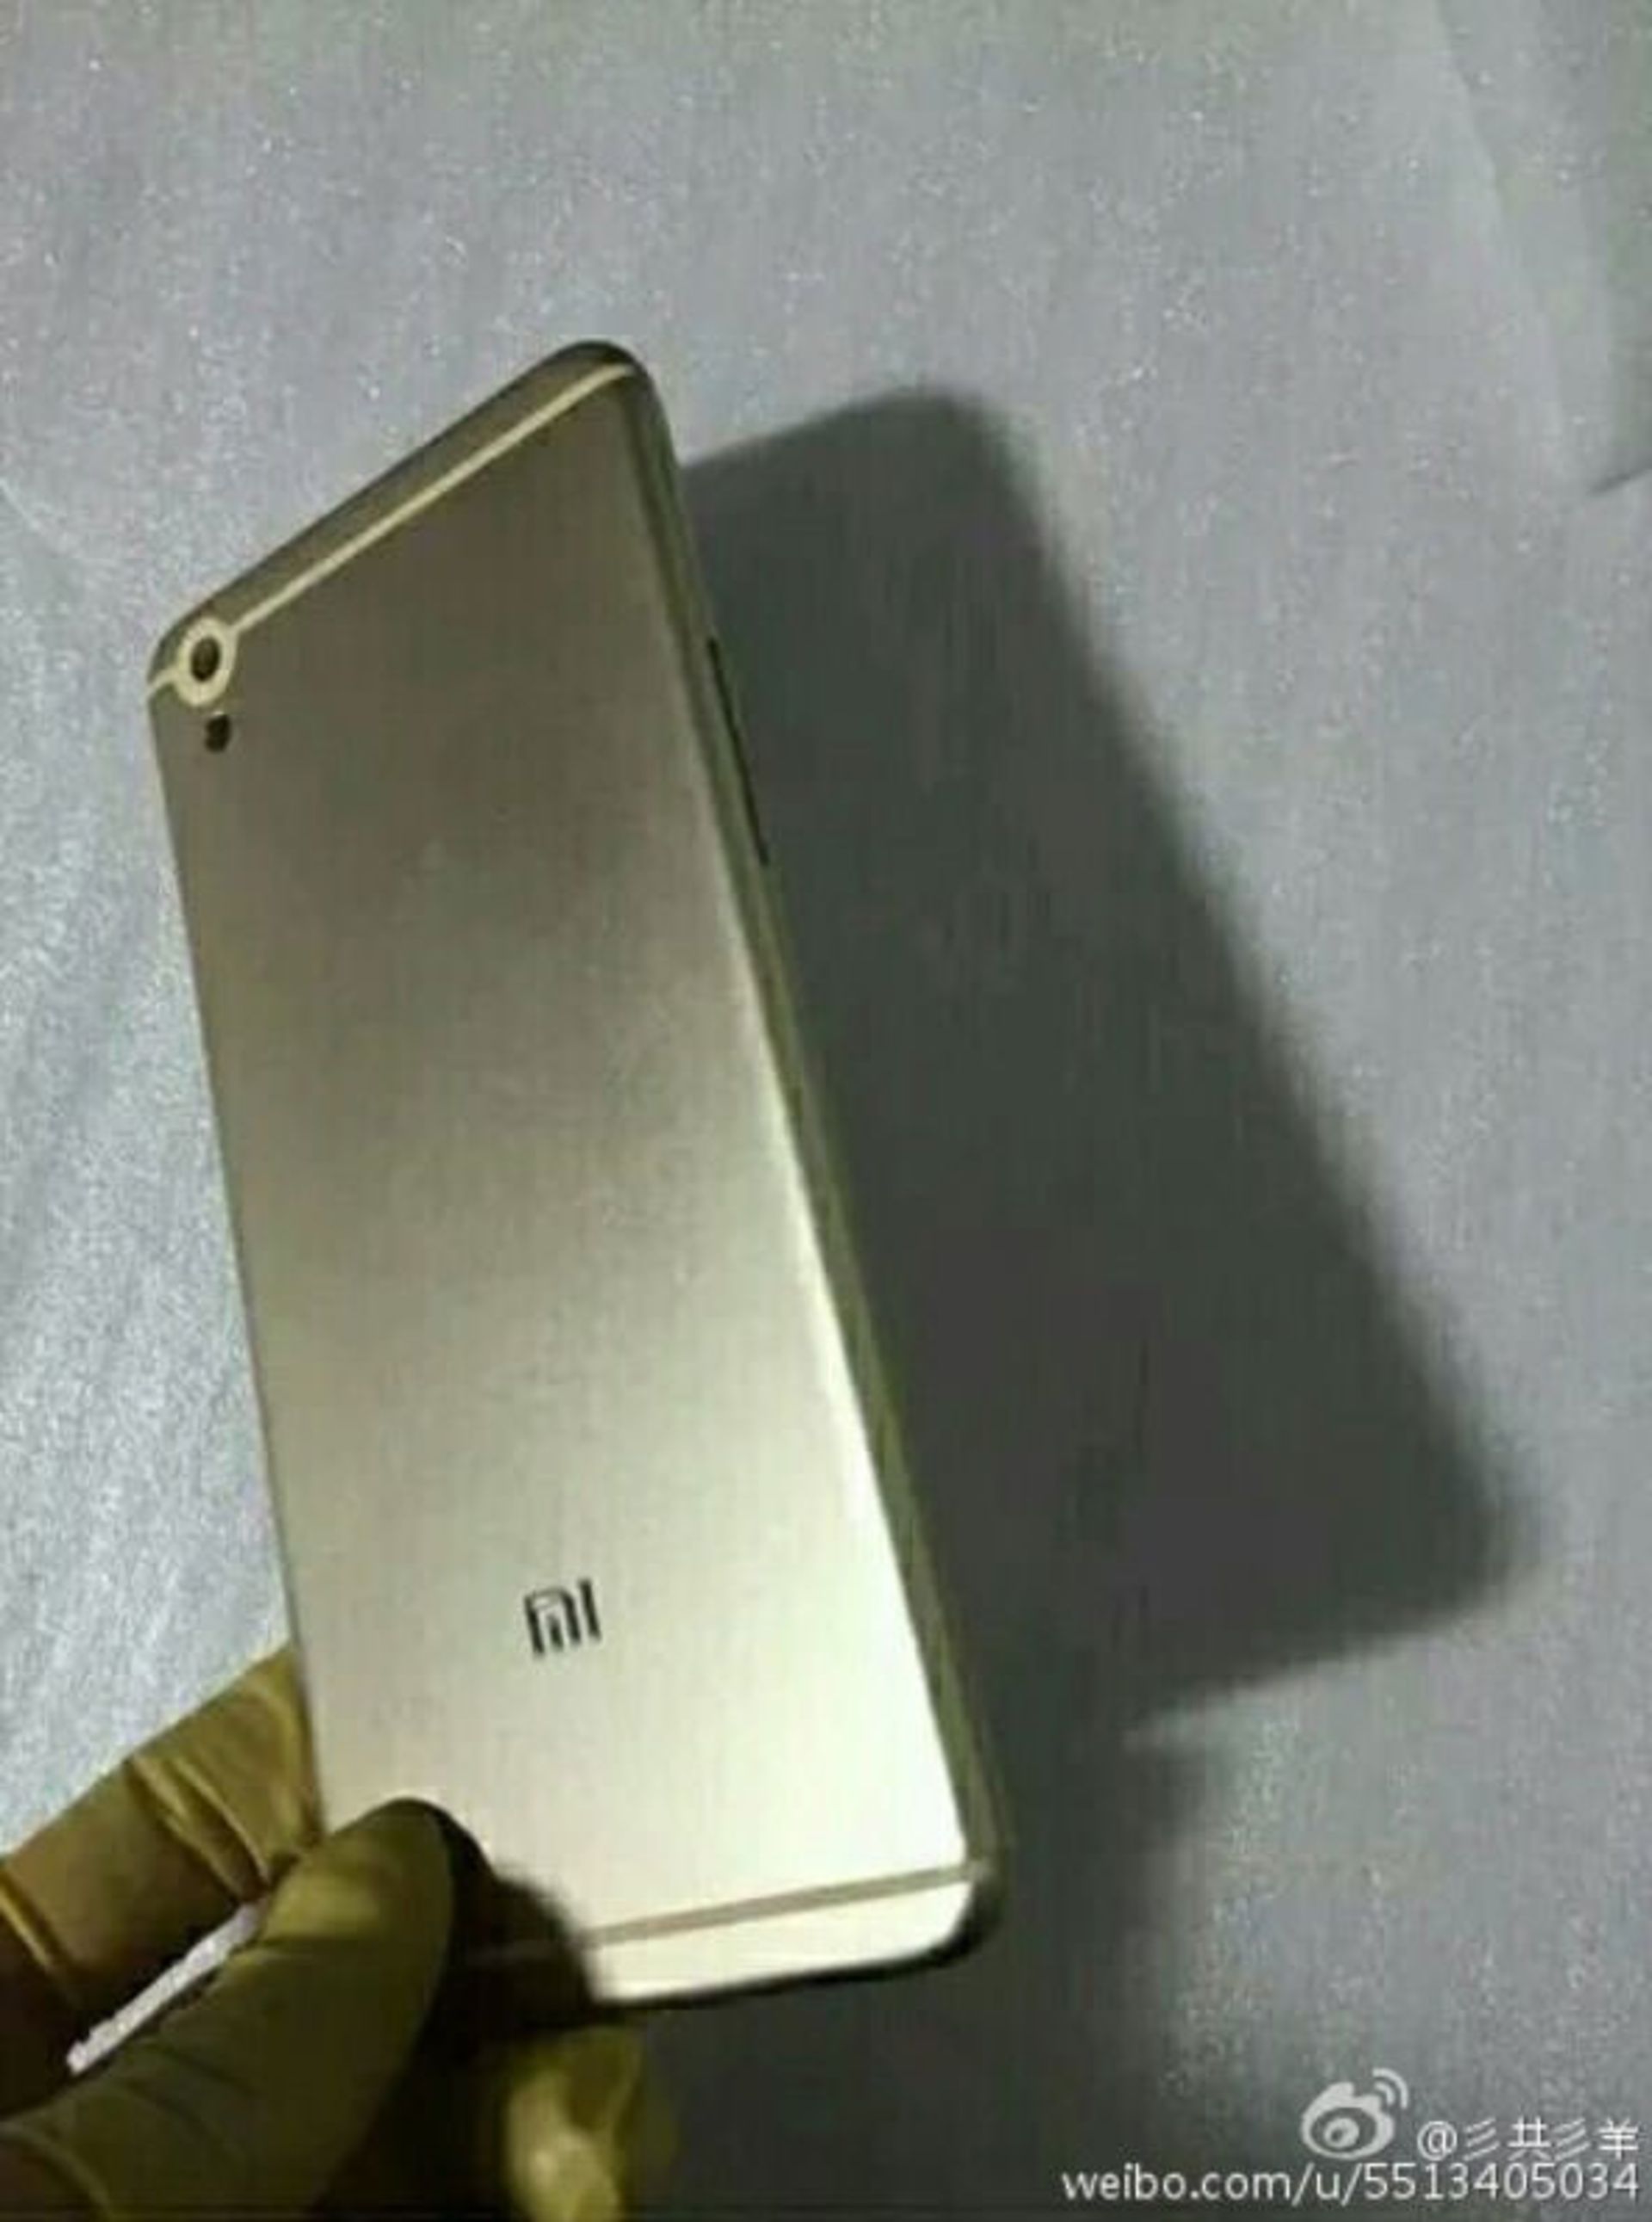 mystery xiaomi handset chassis leaks be190